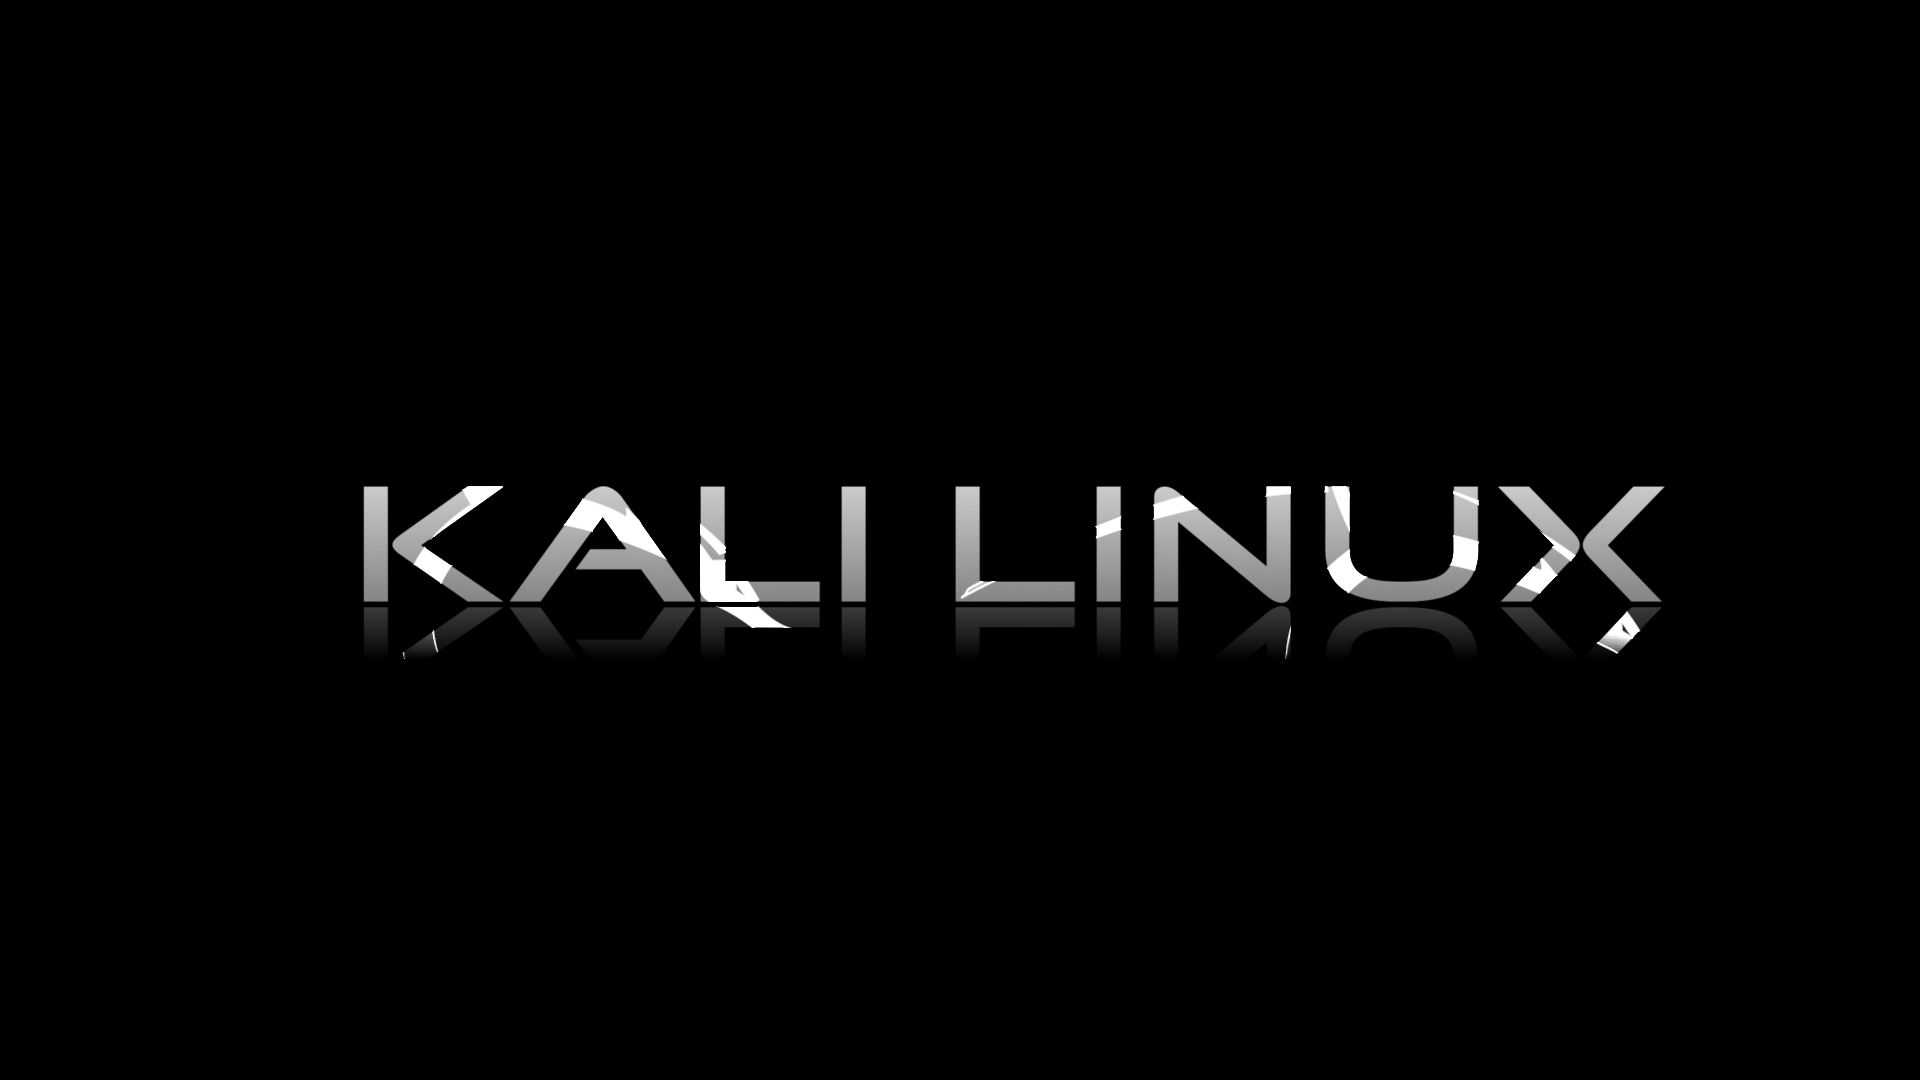 General 1920x1080 Linux typography simple background black background